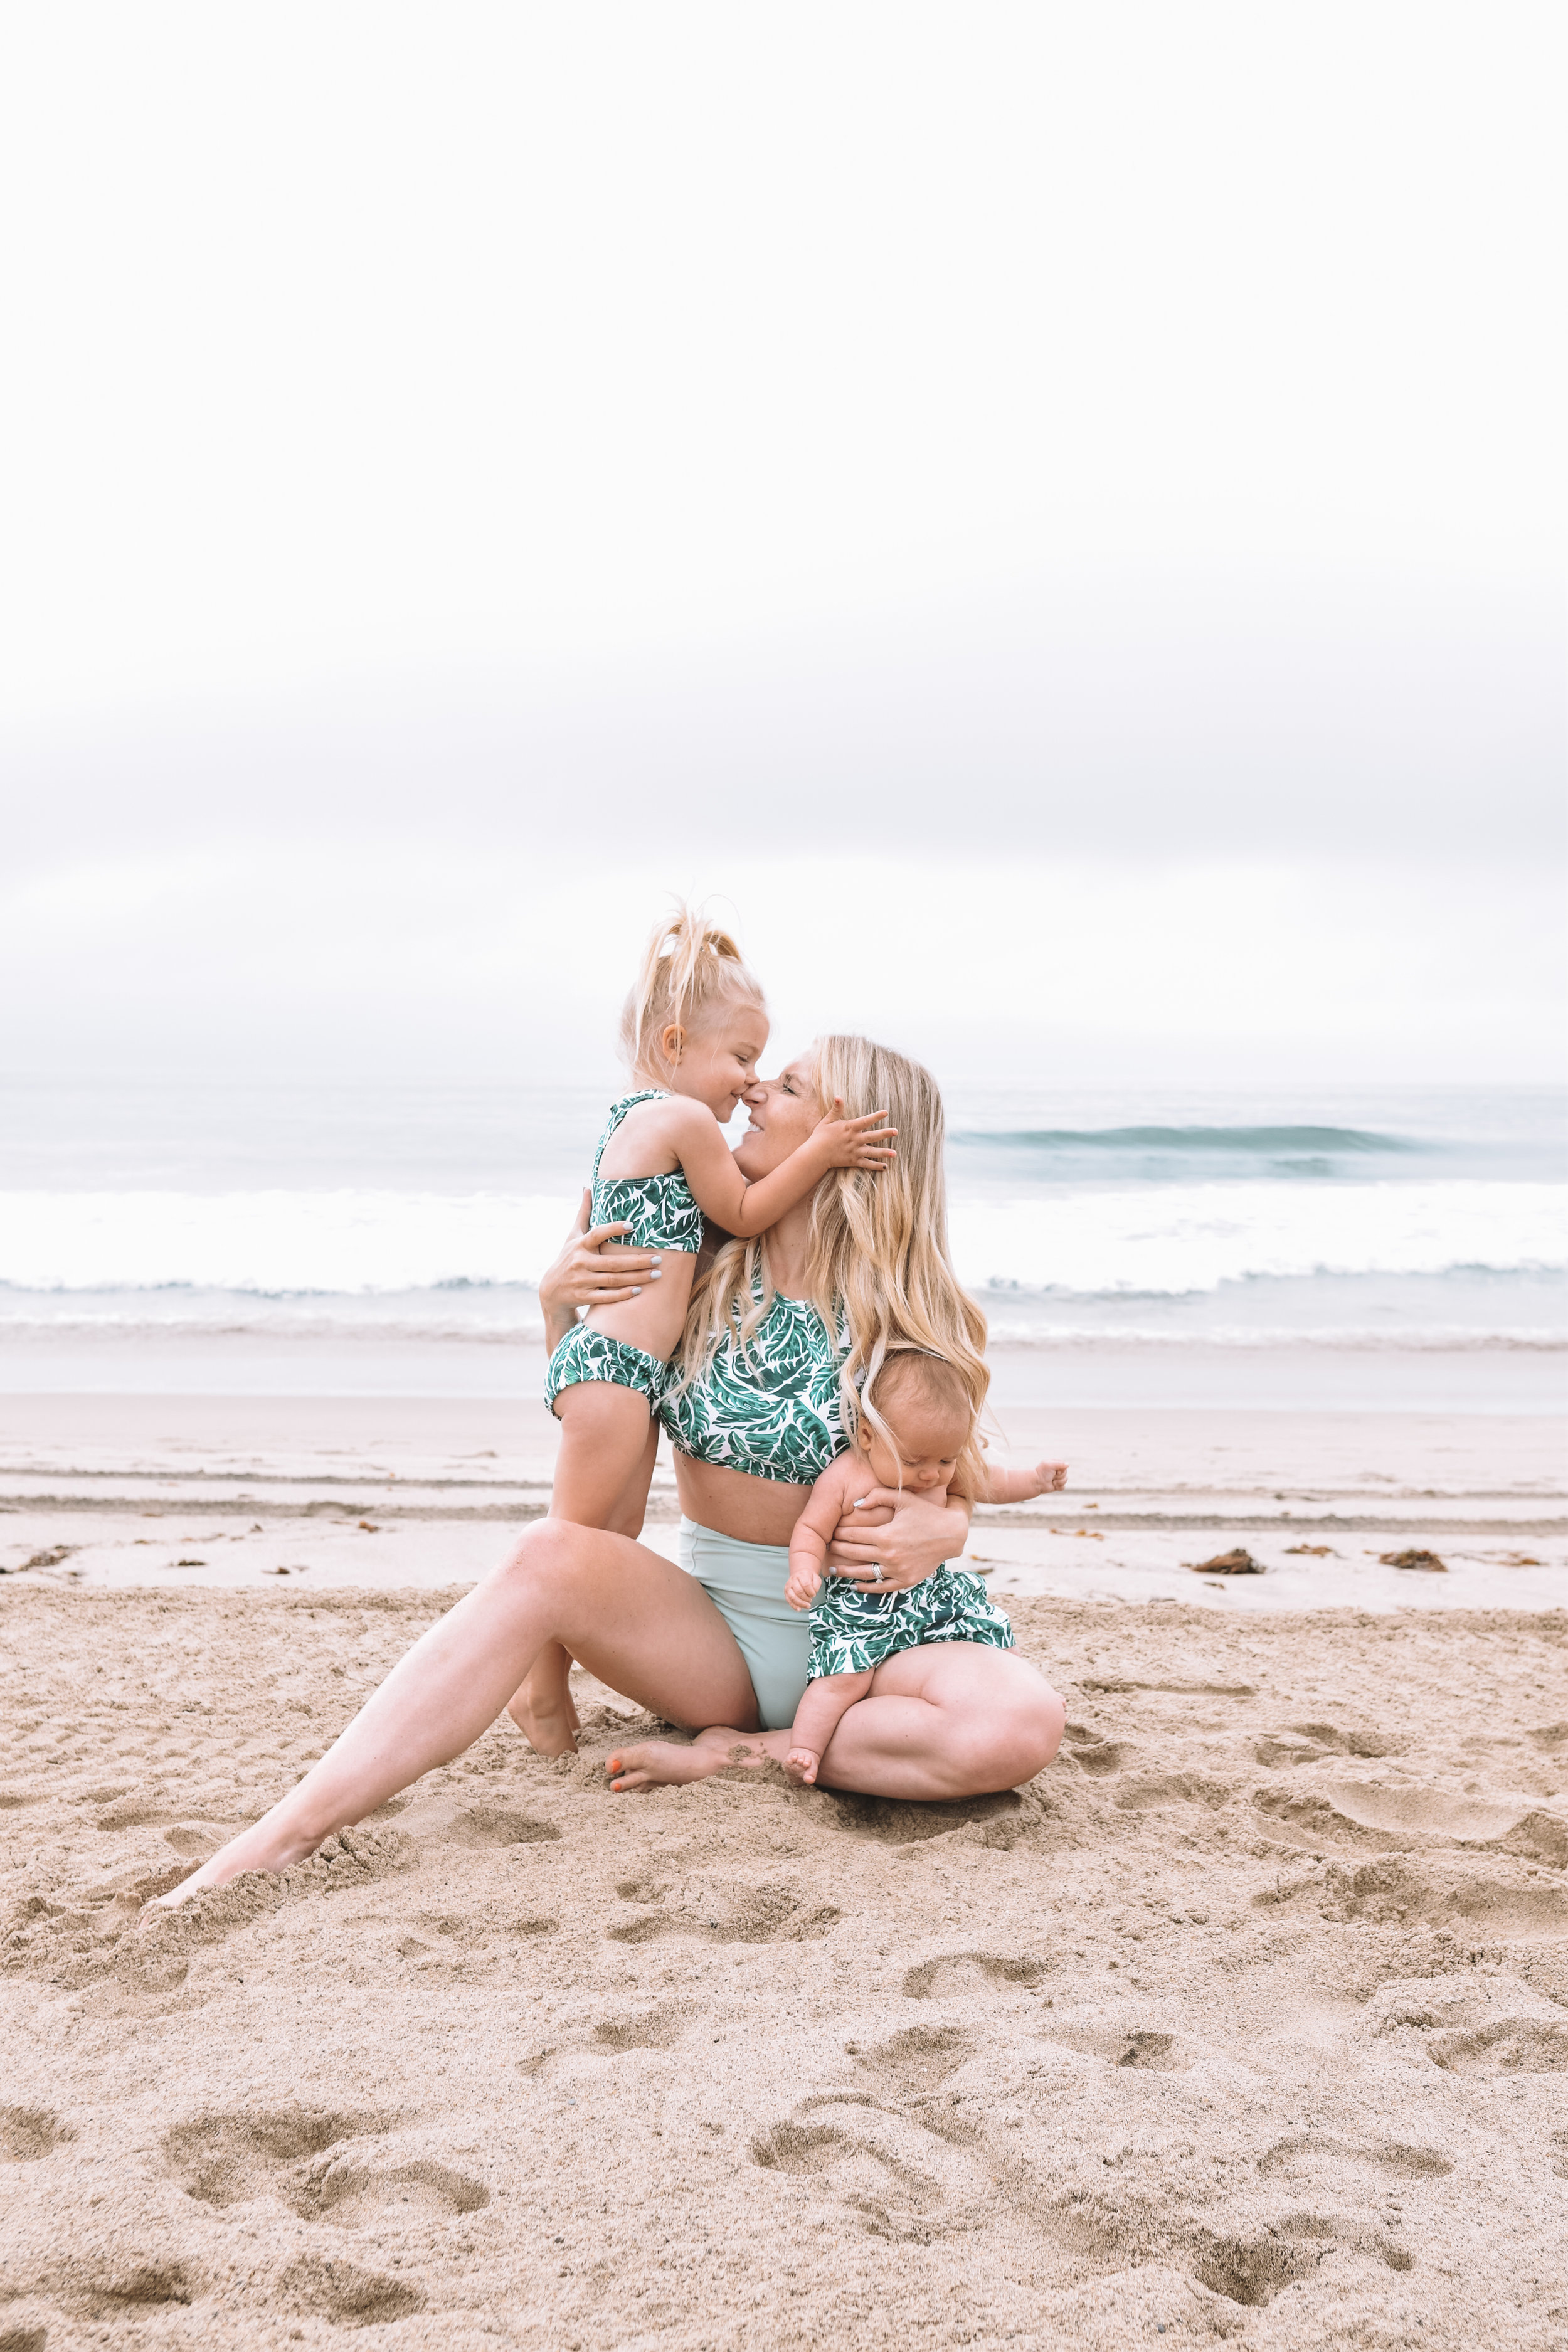 Mommy and Me Matching Swim Suits - The Overwhelmed Mommy Blogger